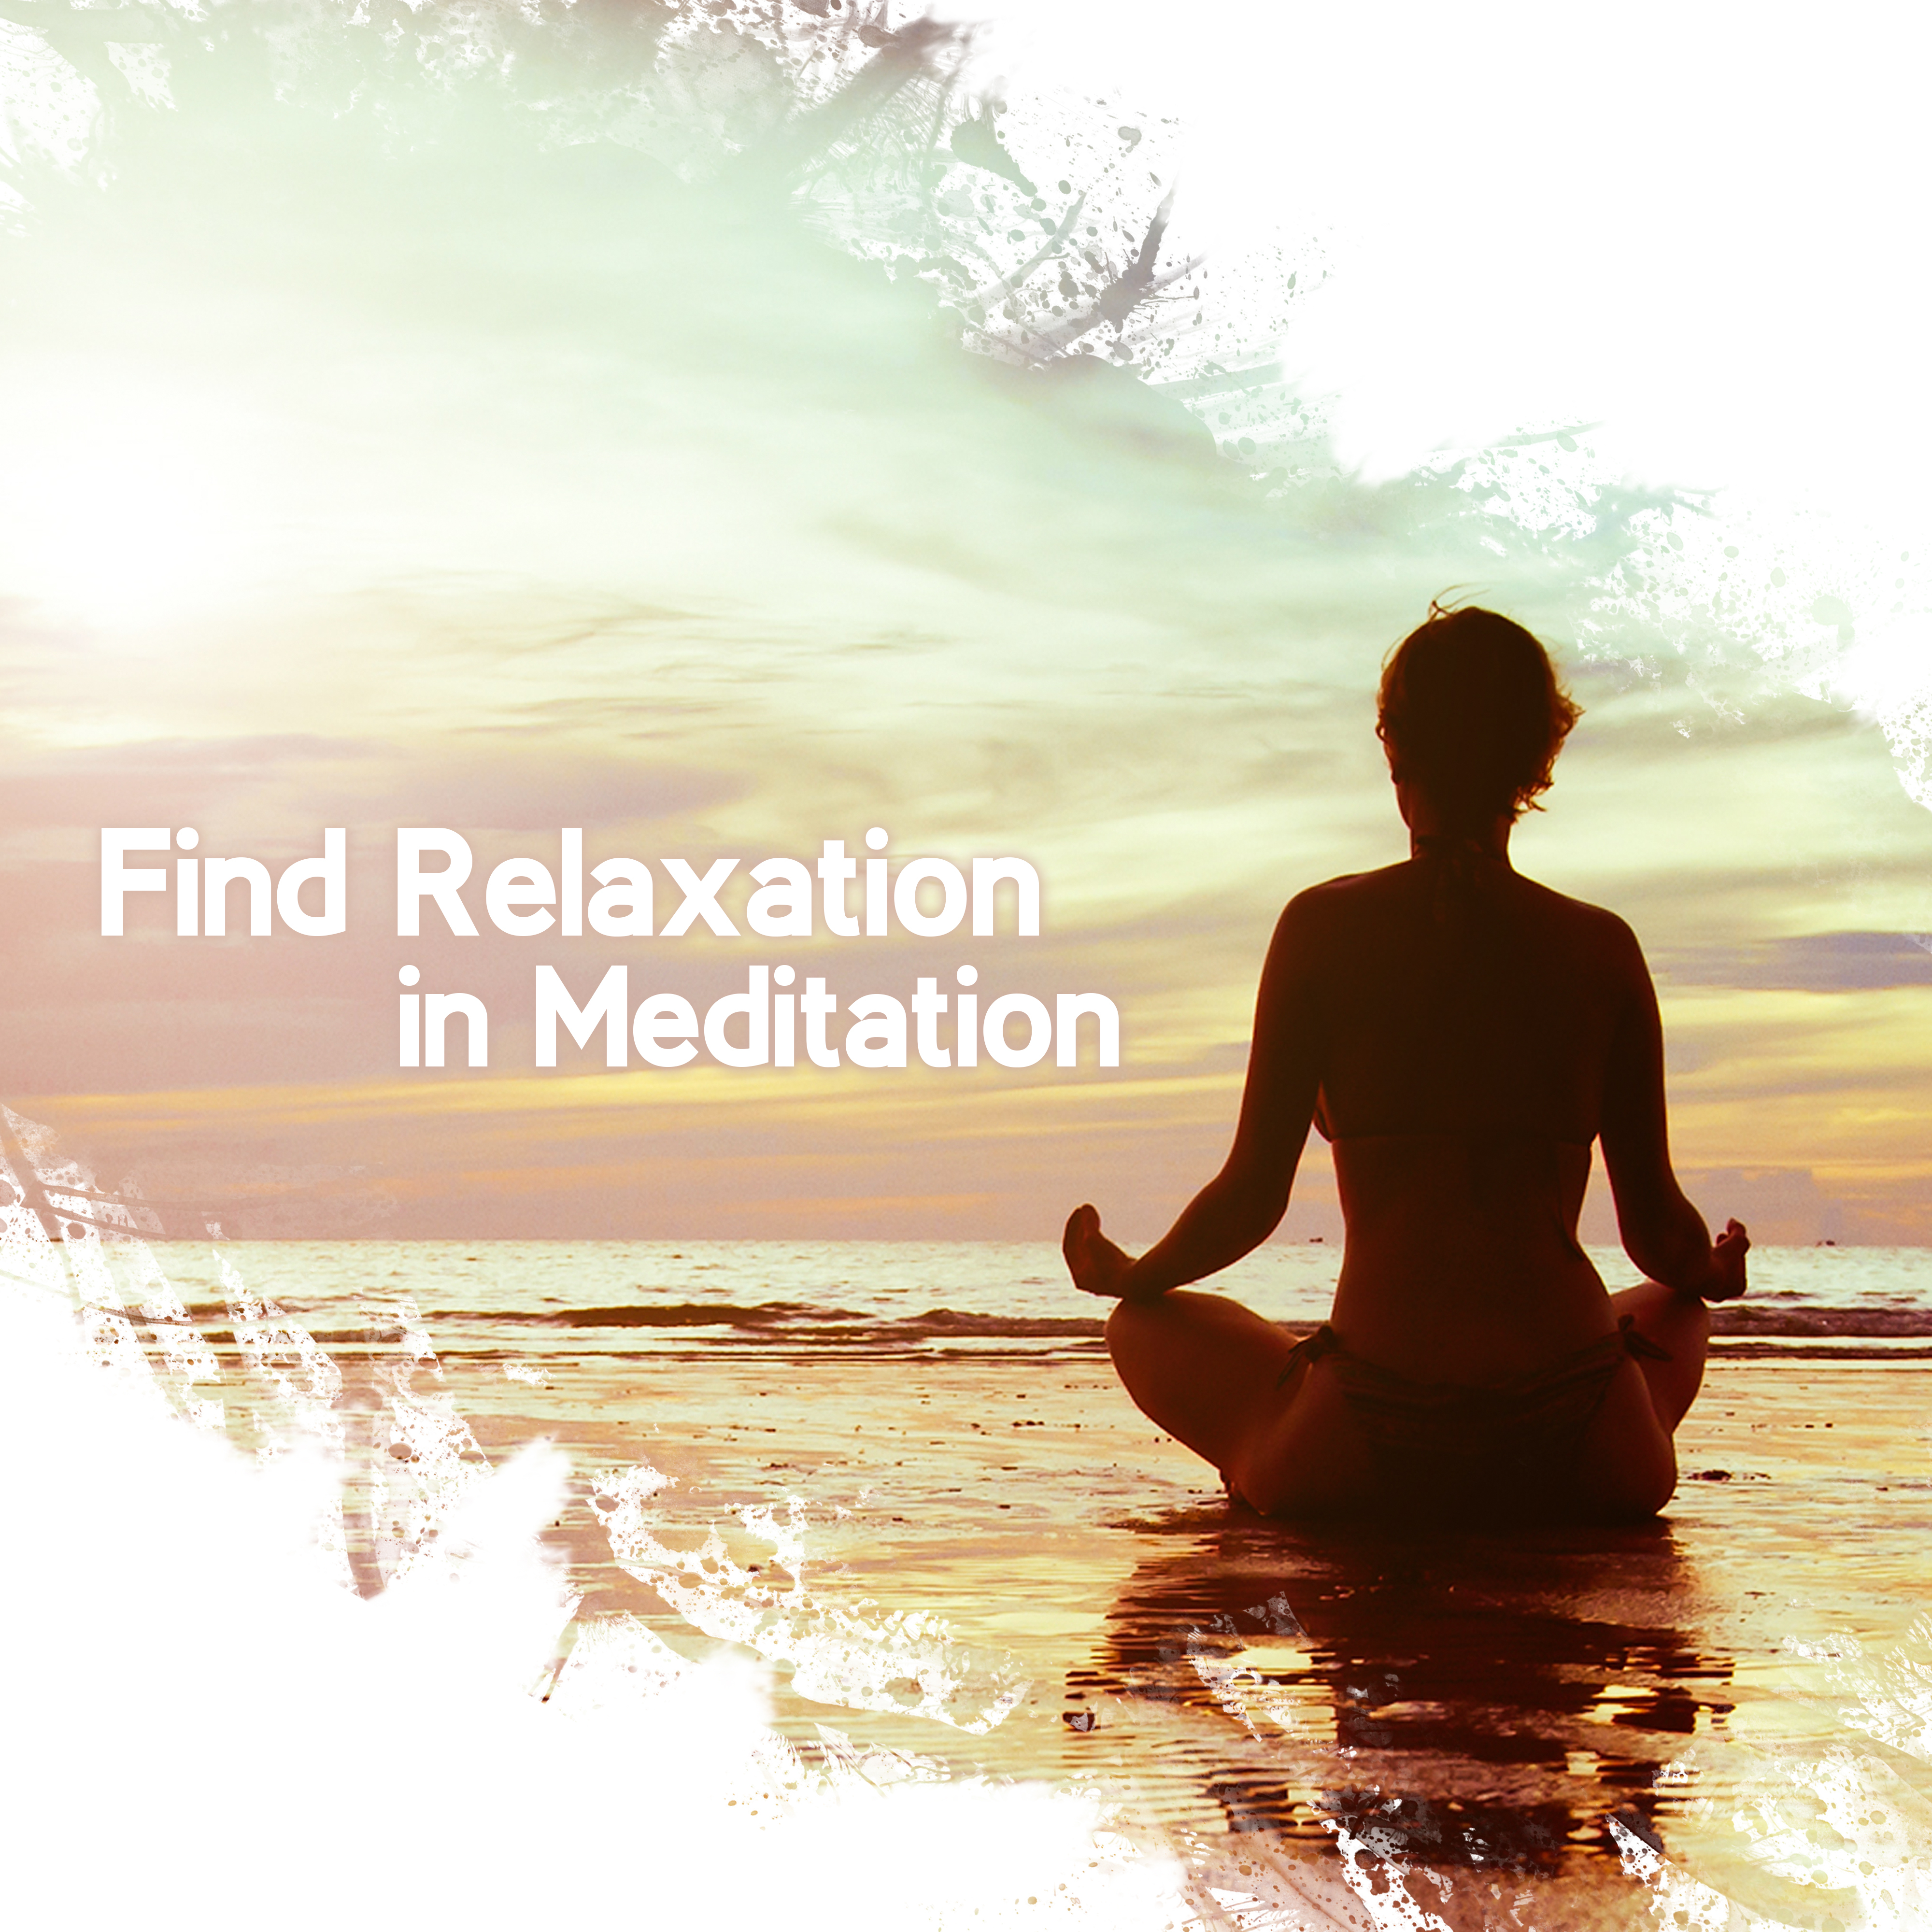 Find Relaxation in Meditation